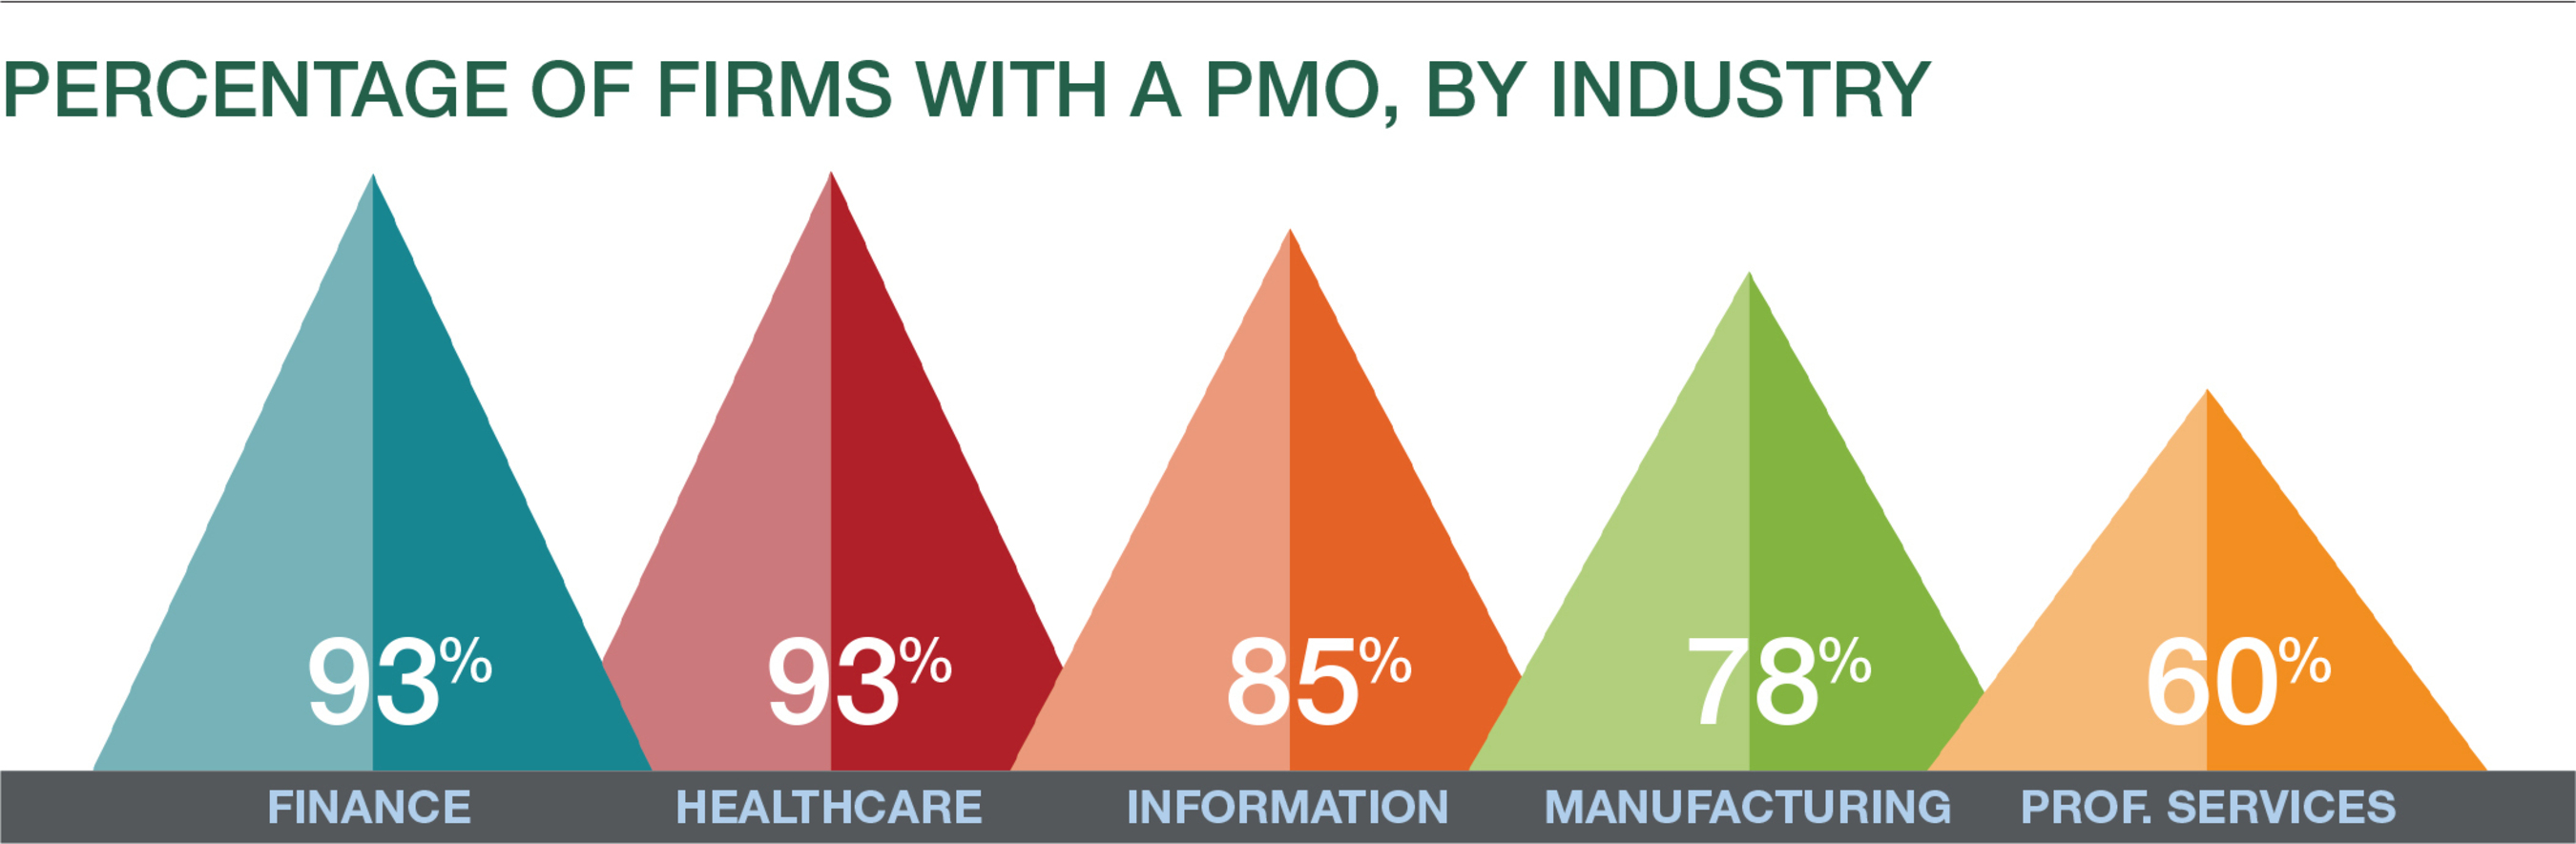 PMOs by Industry (PRNewsFoto/PM Solutions)